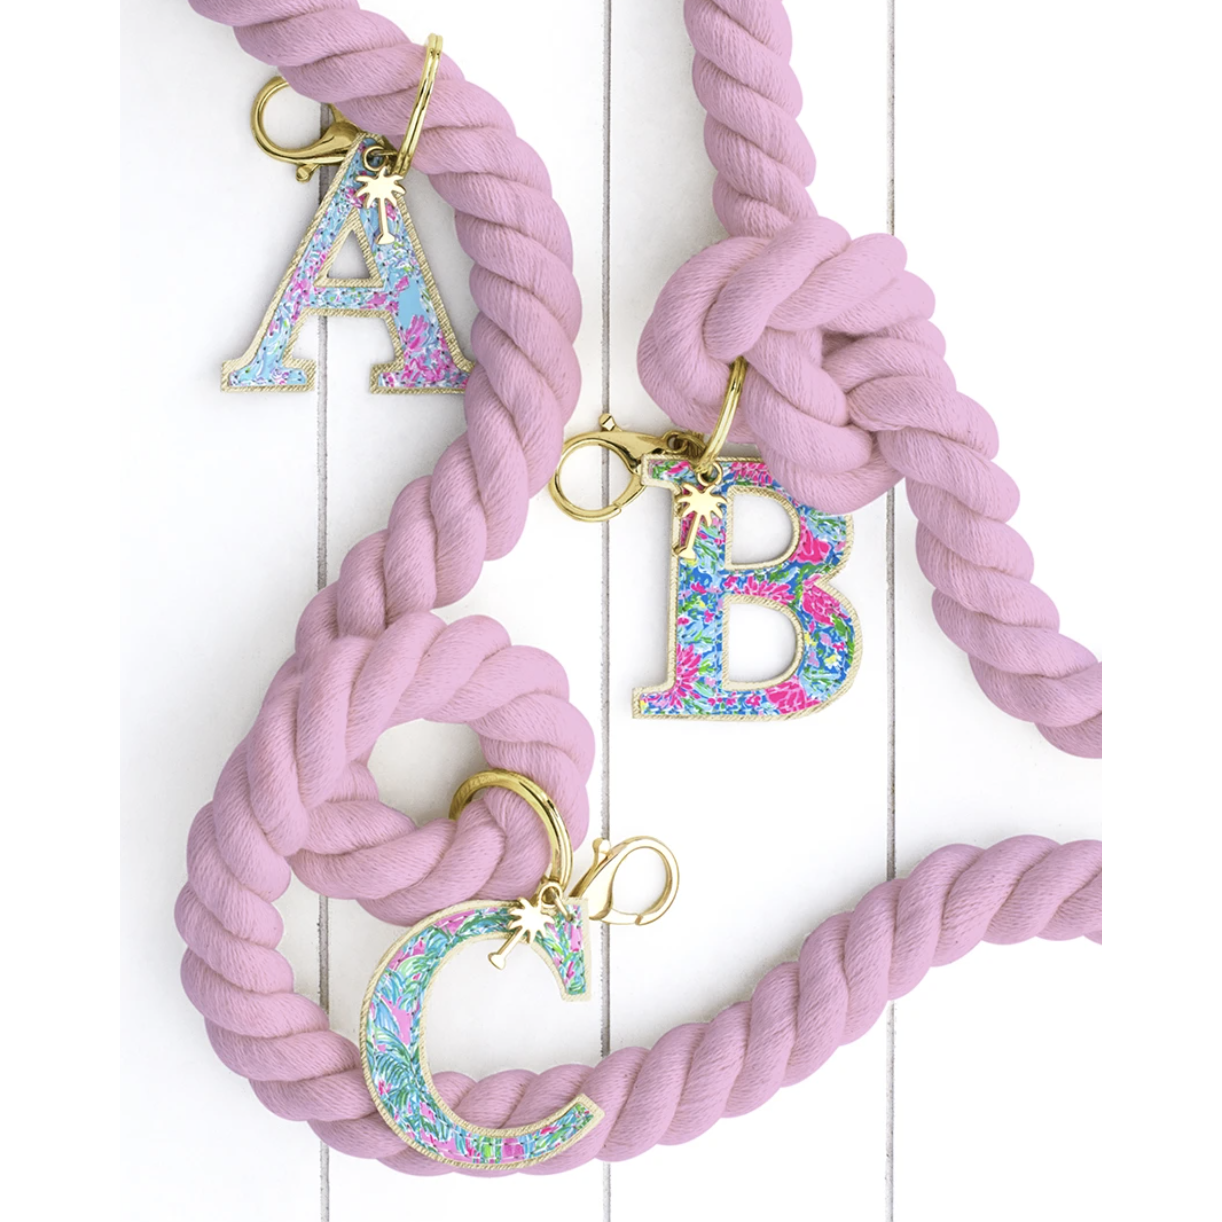 Lilly Pulitzer Initial Keychain – Riley Reigh / Mod Market